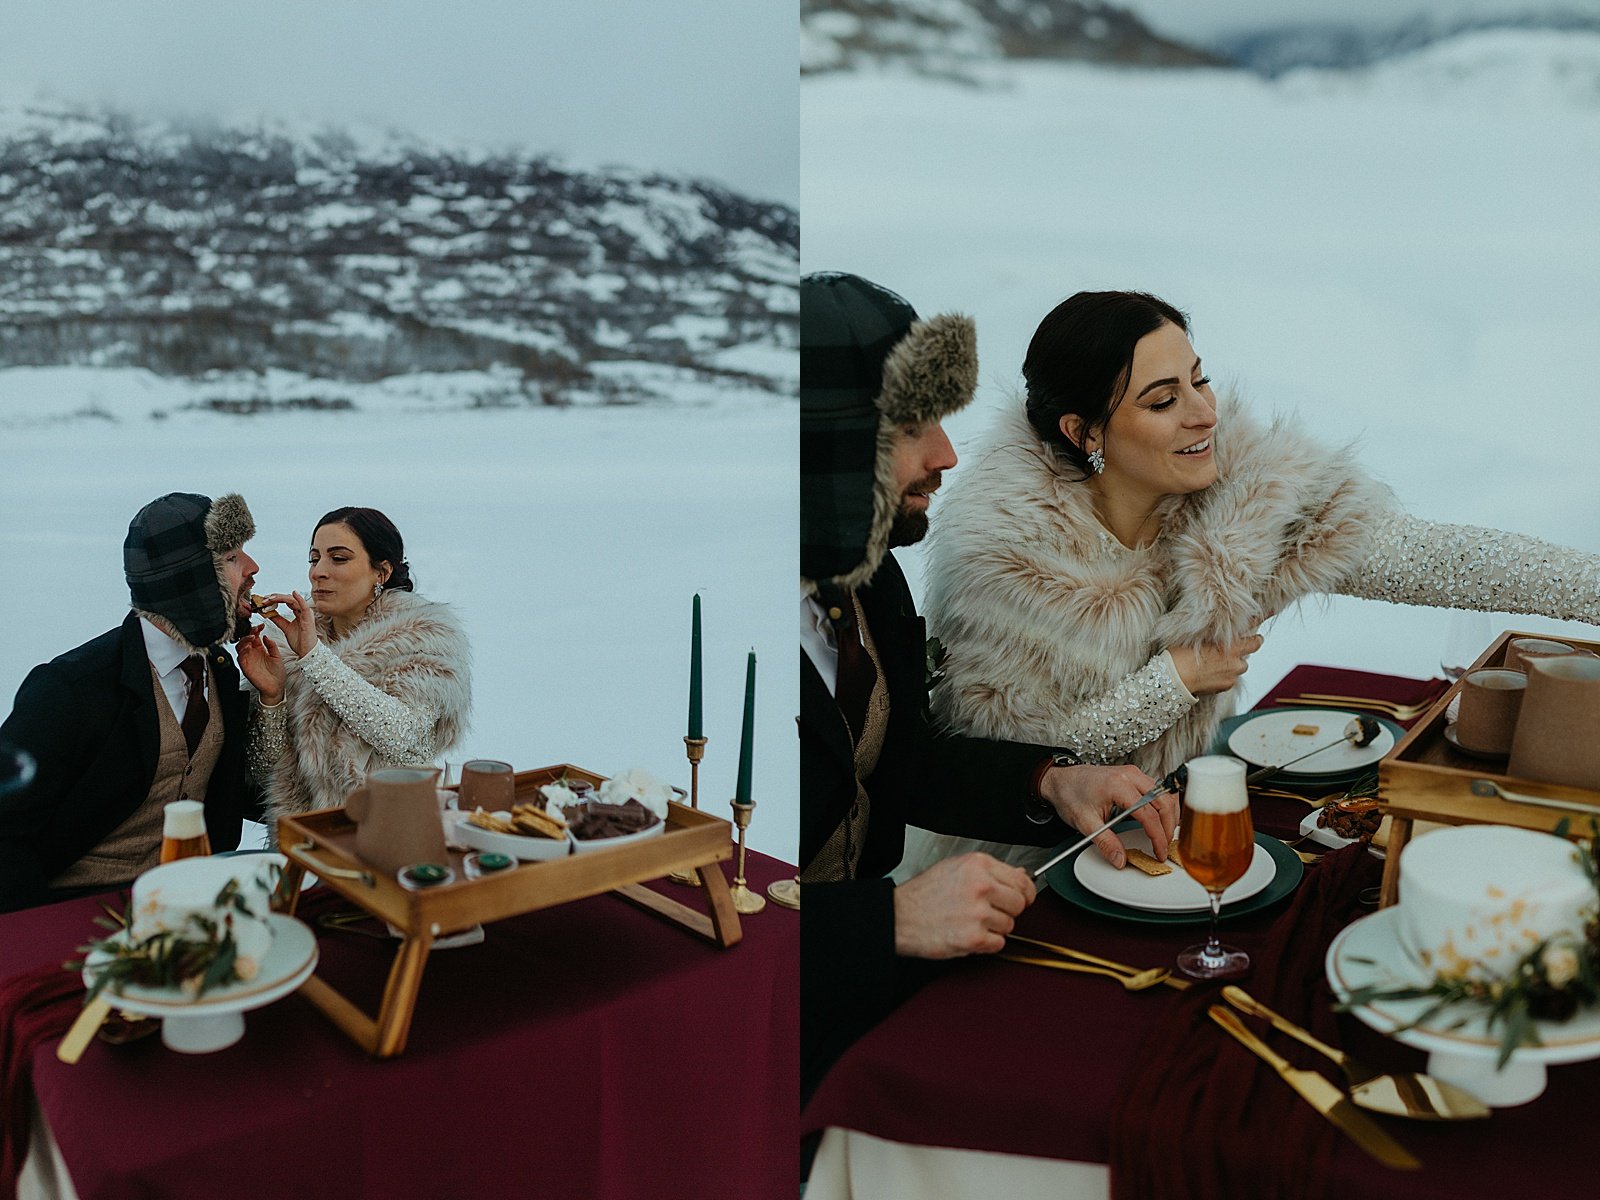  Bride and groom enjoying a private dining experience on a mountaintop 